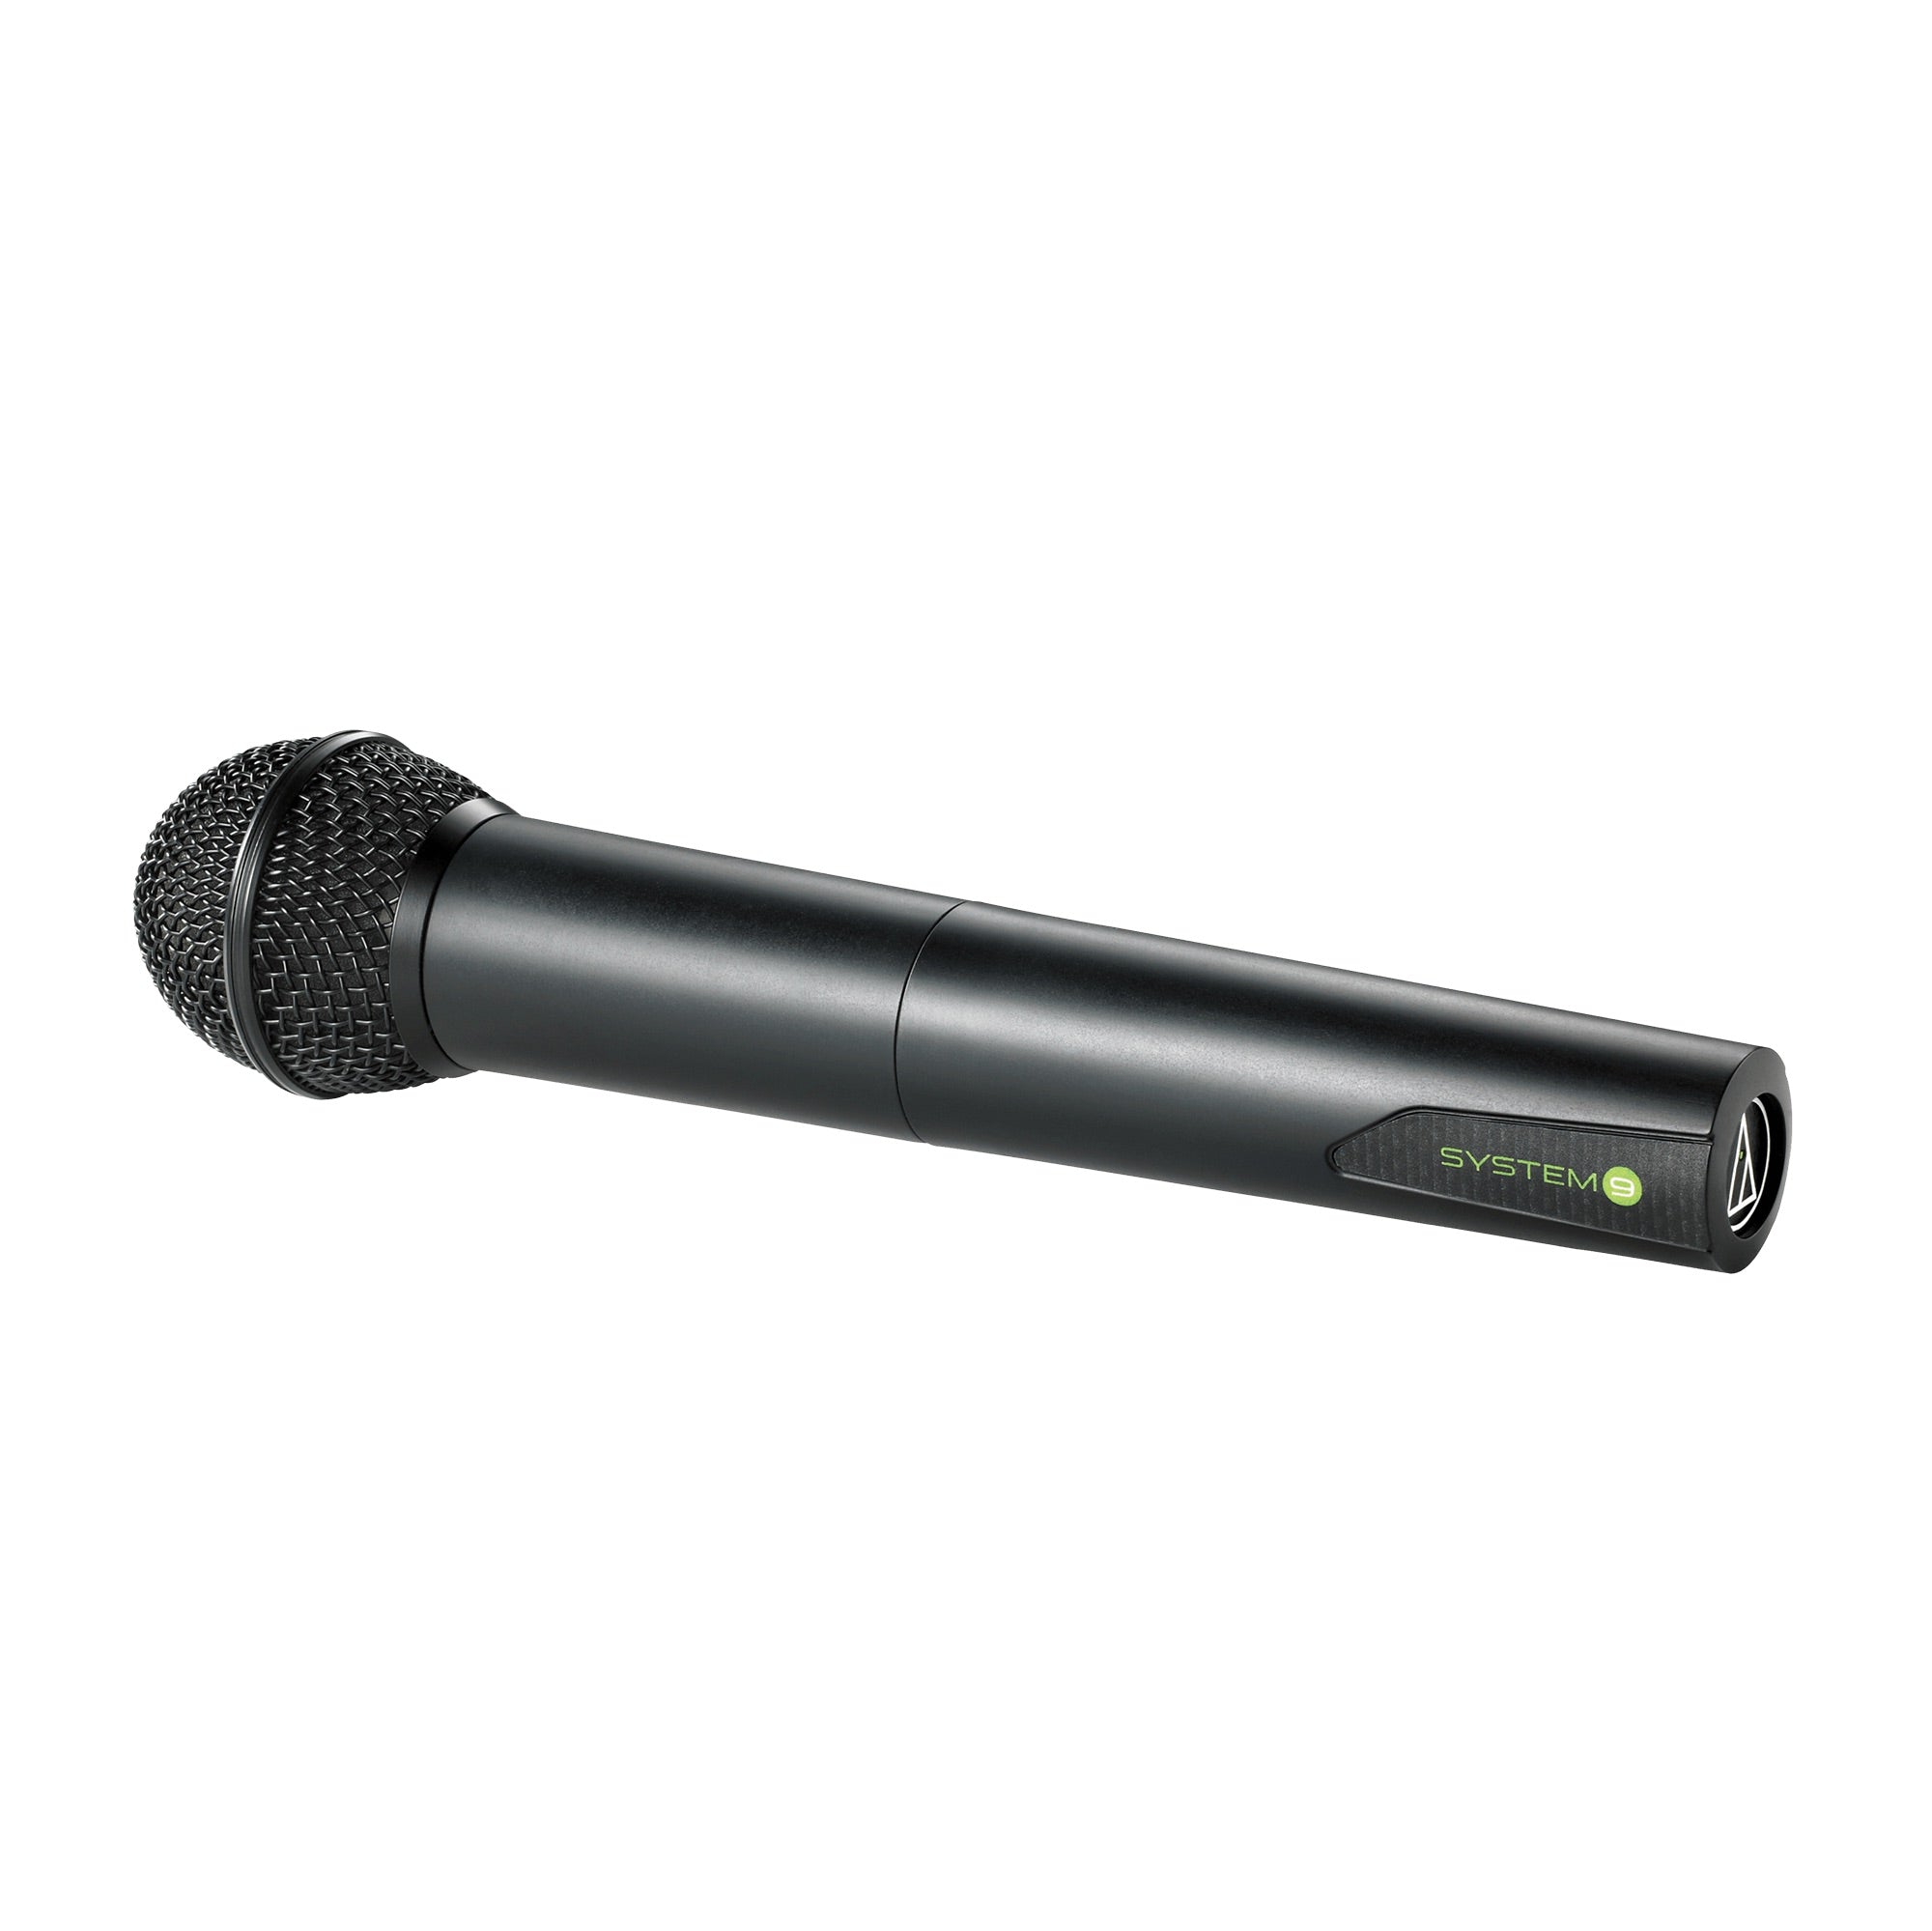 Audio-Technica ATW-T902a - System 9 Handheld Microphone/Transmitter